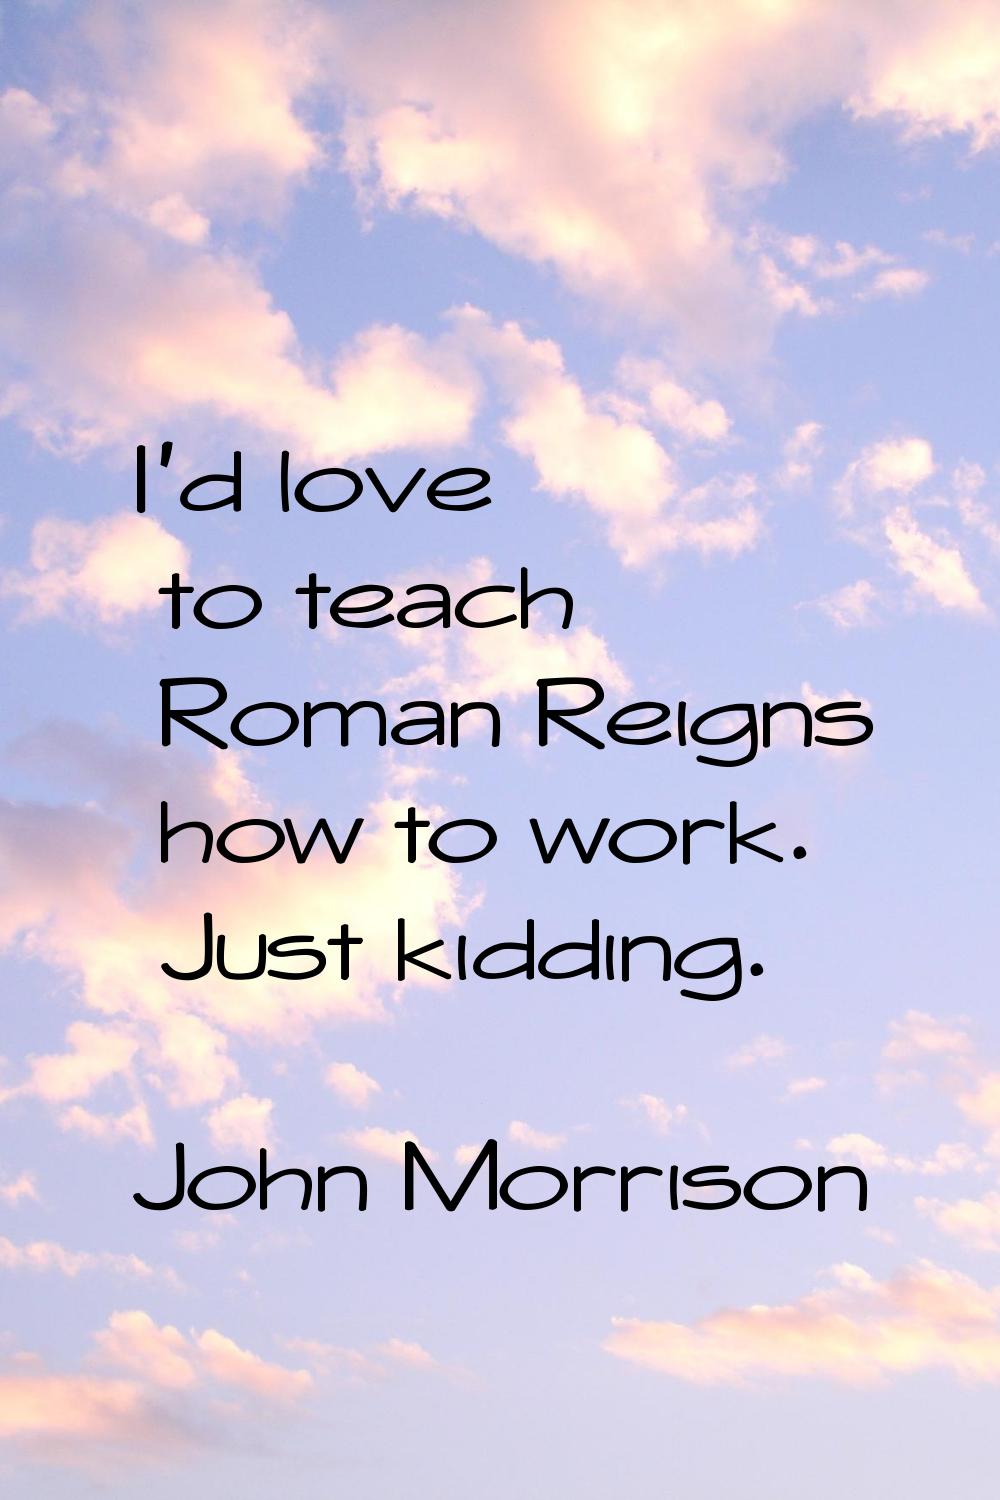 I'd love to teach Roman Reigns how to work. Just kidding.